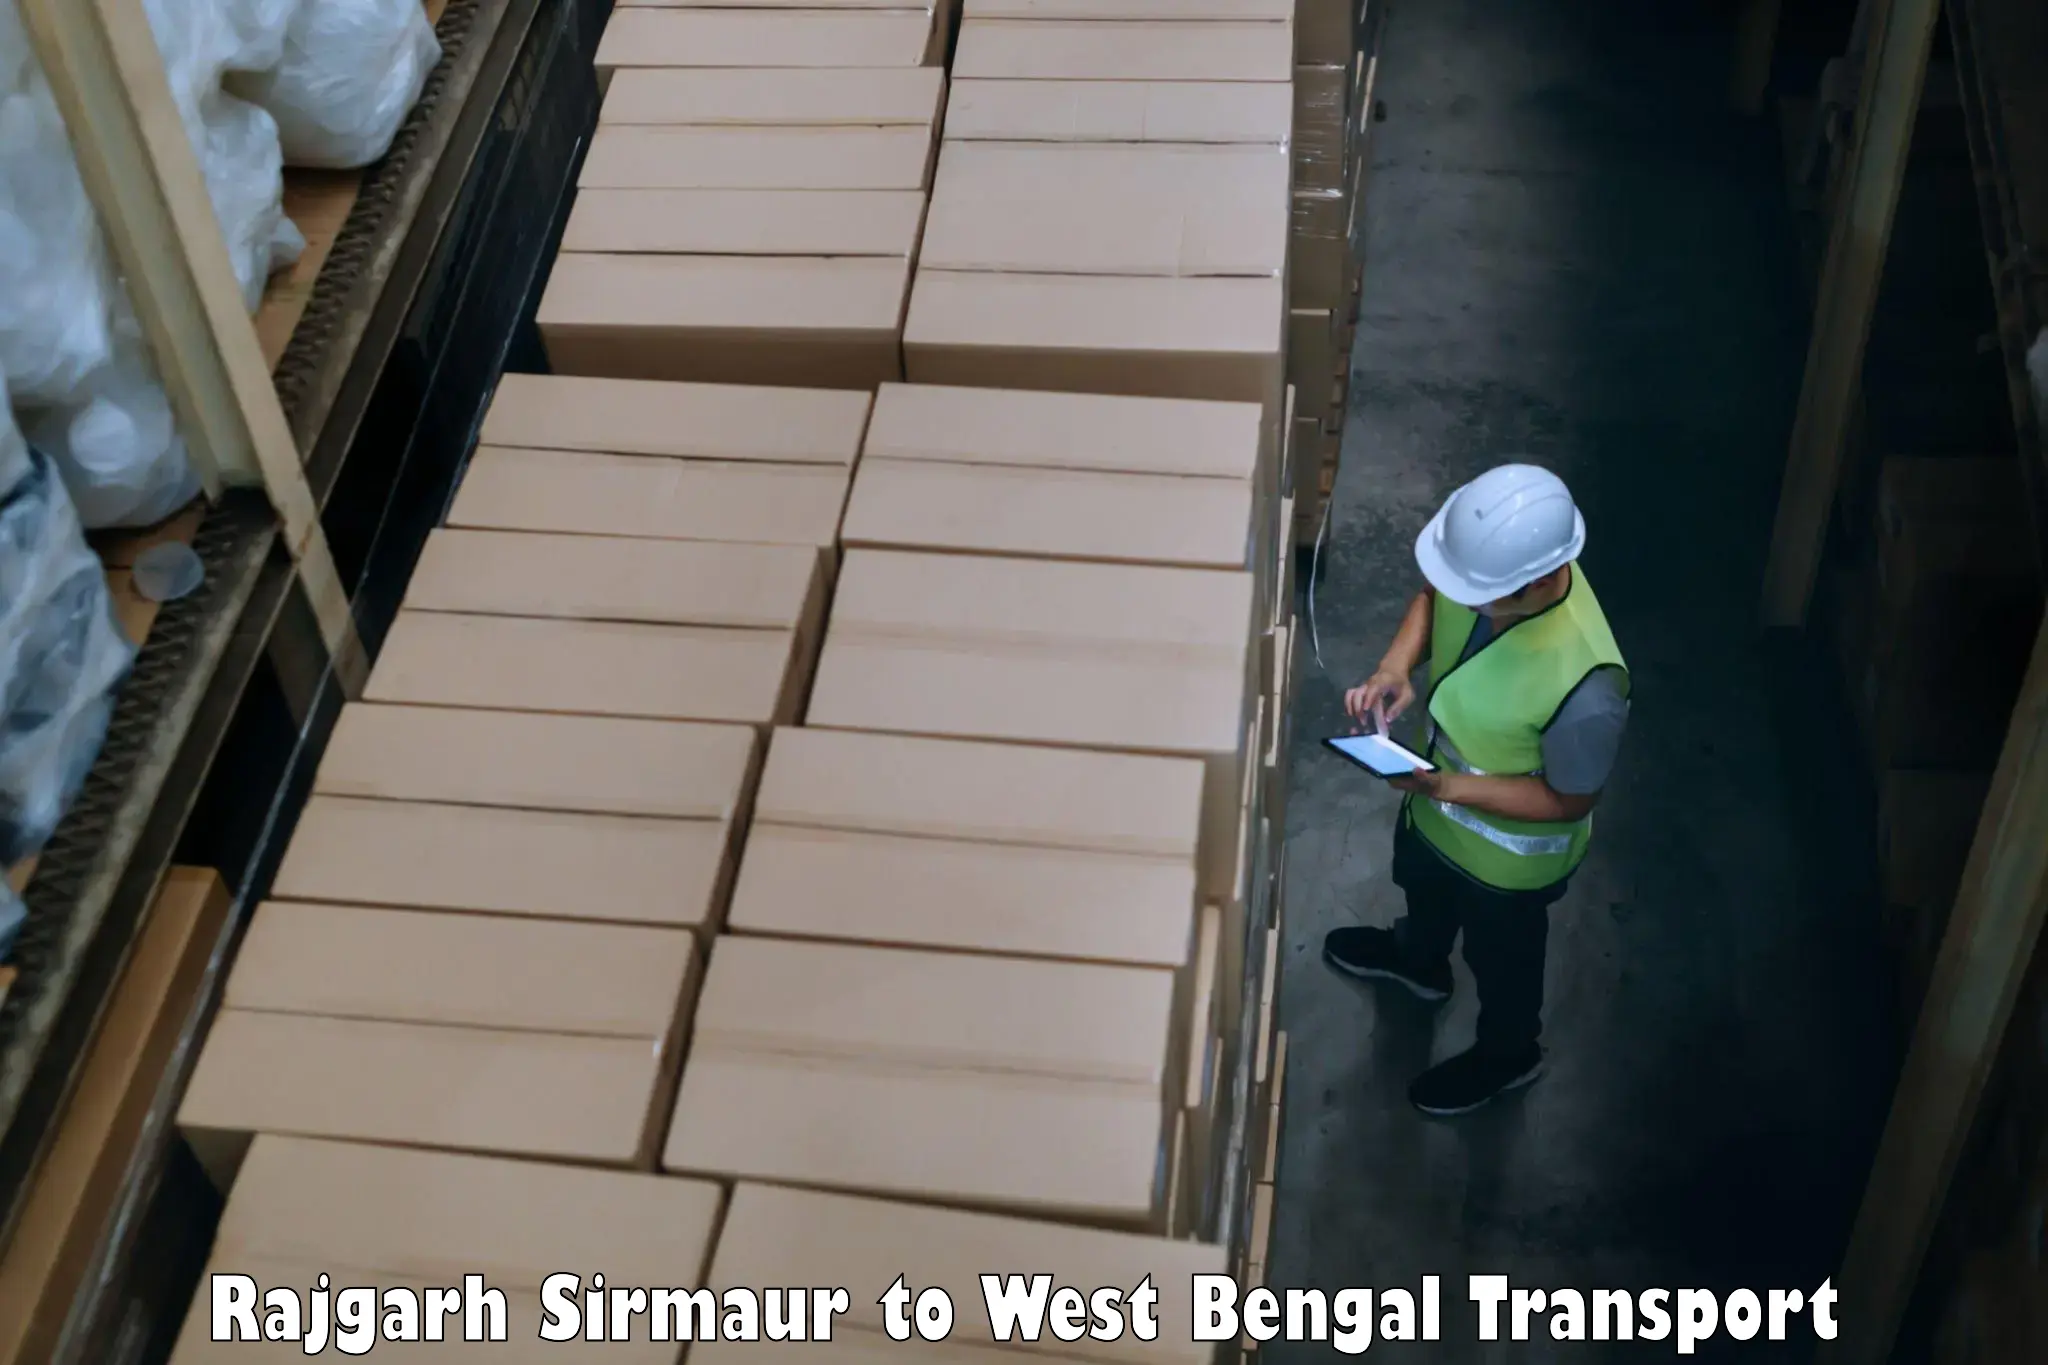 Transport bike from one state to another Rajgarh Sirmaur to West Bengal